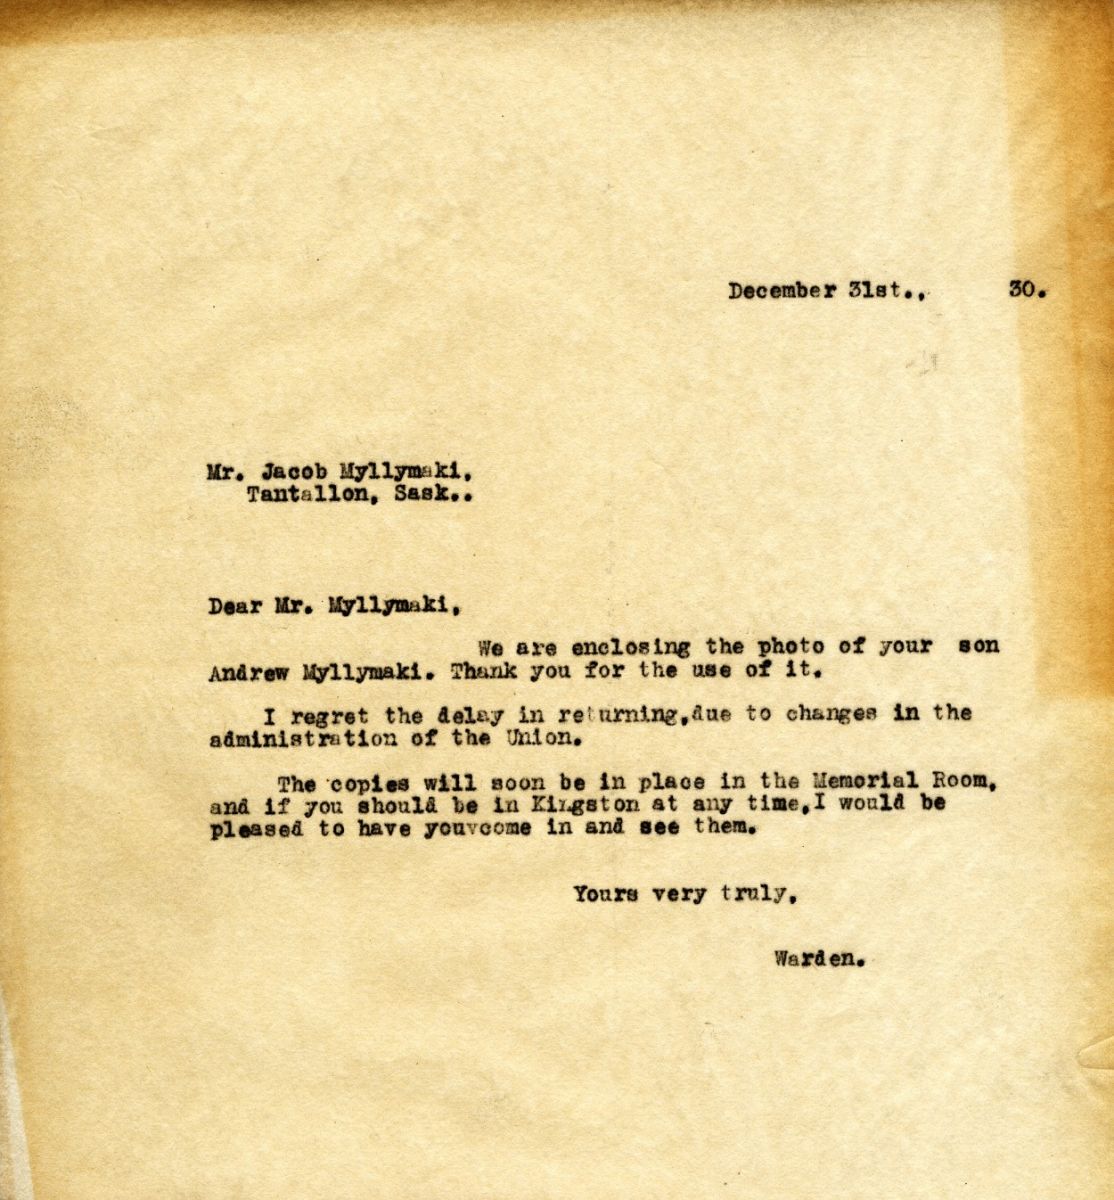 Letter from the Warden to Mr. Jacob Myllymaki, 31st December 1930